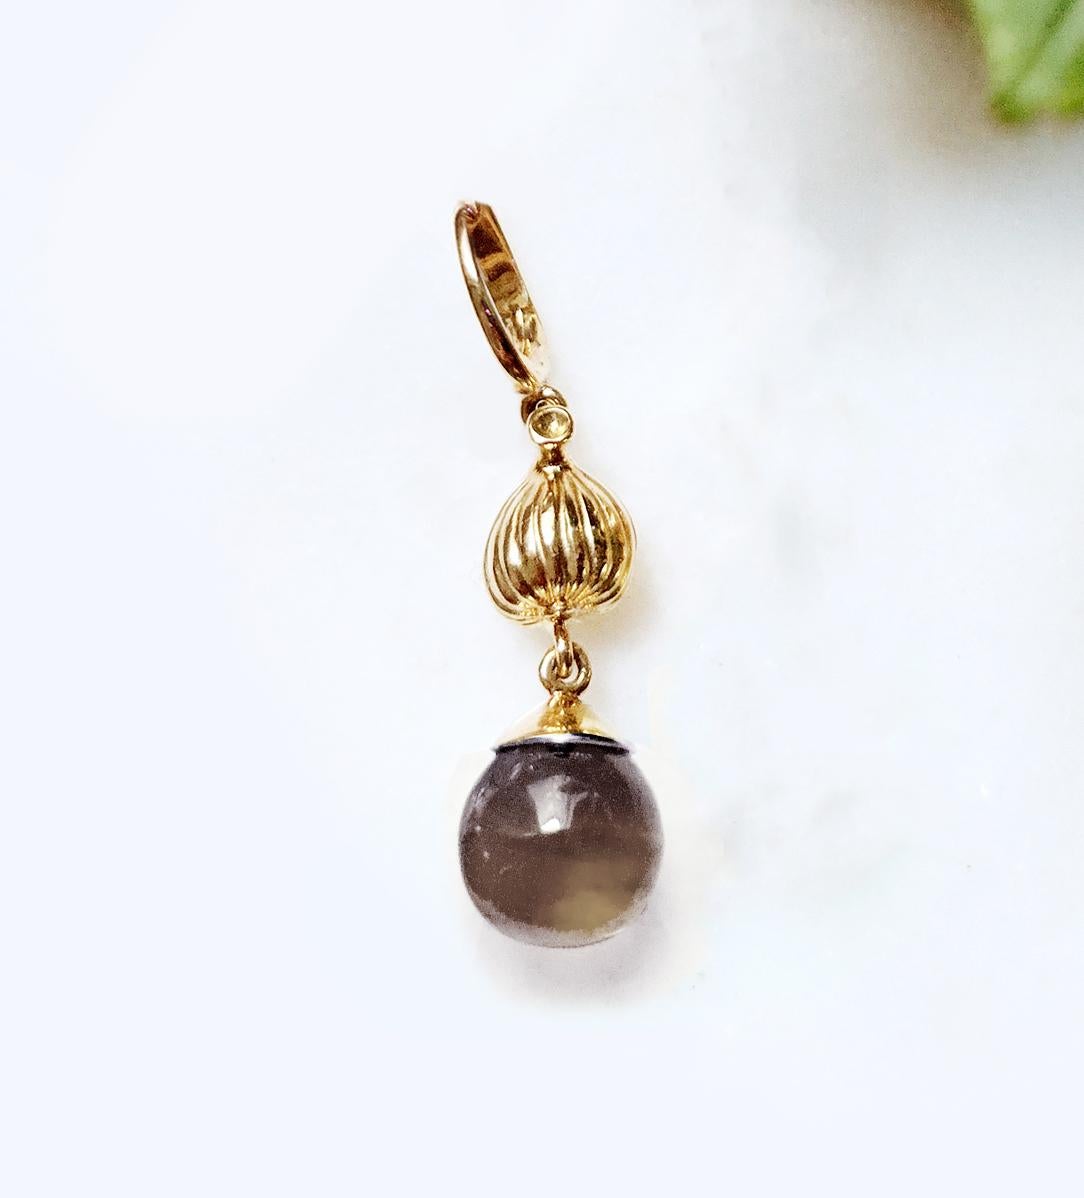 Cabochon Yellow Gold Fig Necklace Pendant with Smoky Quartz by the Artist For Sale